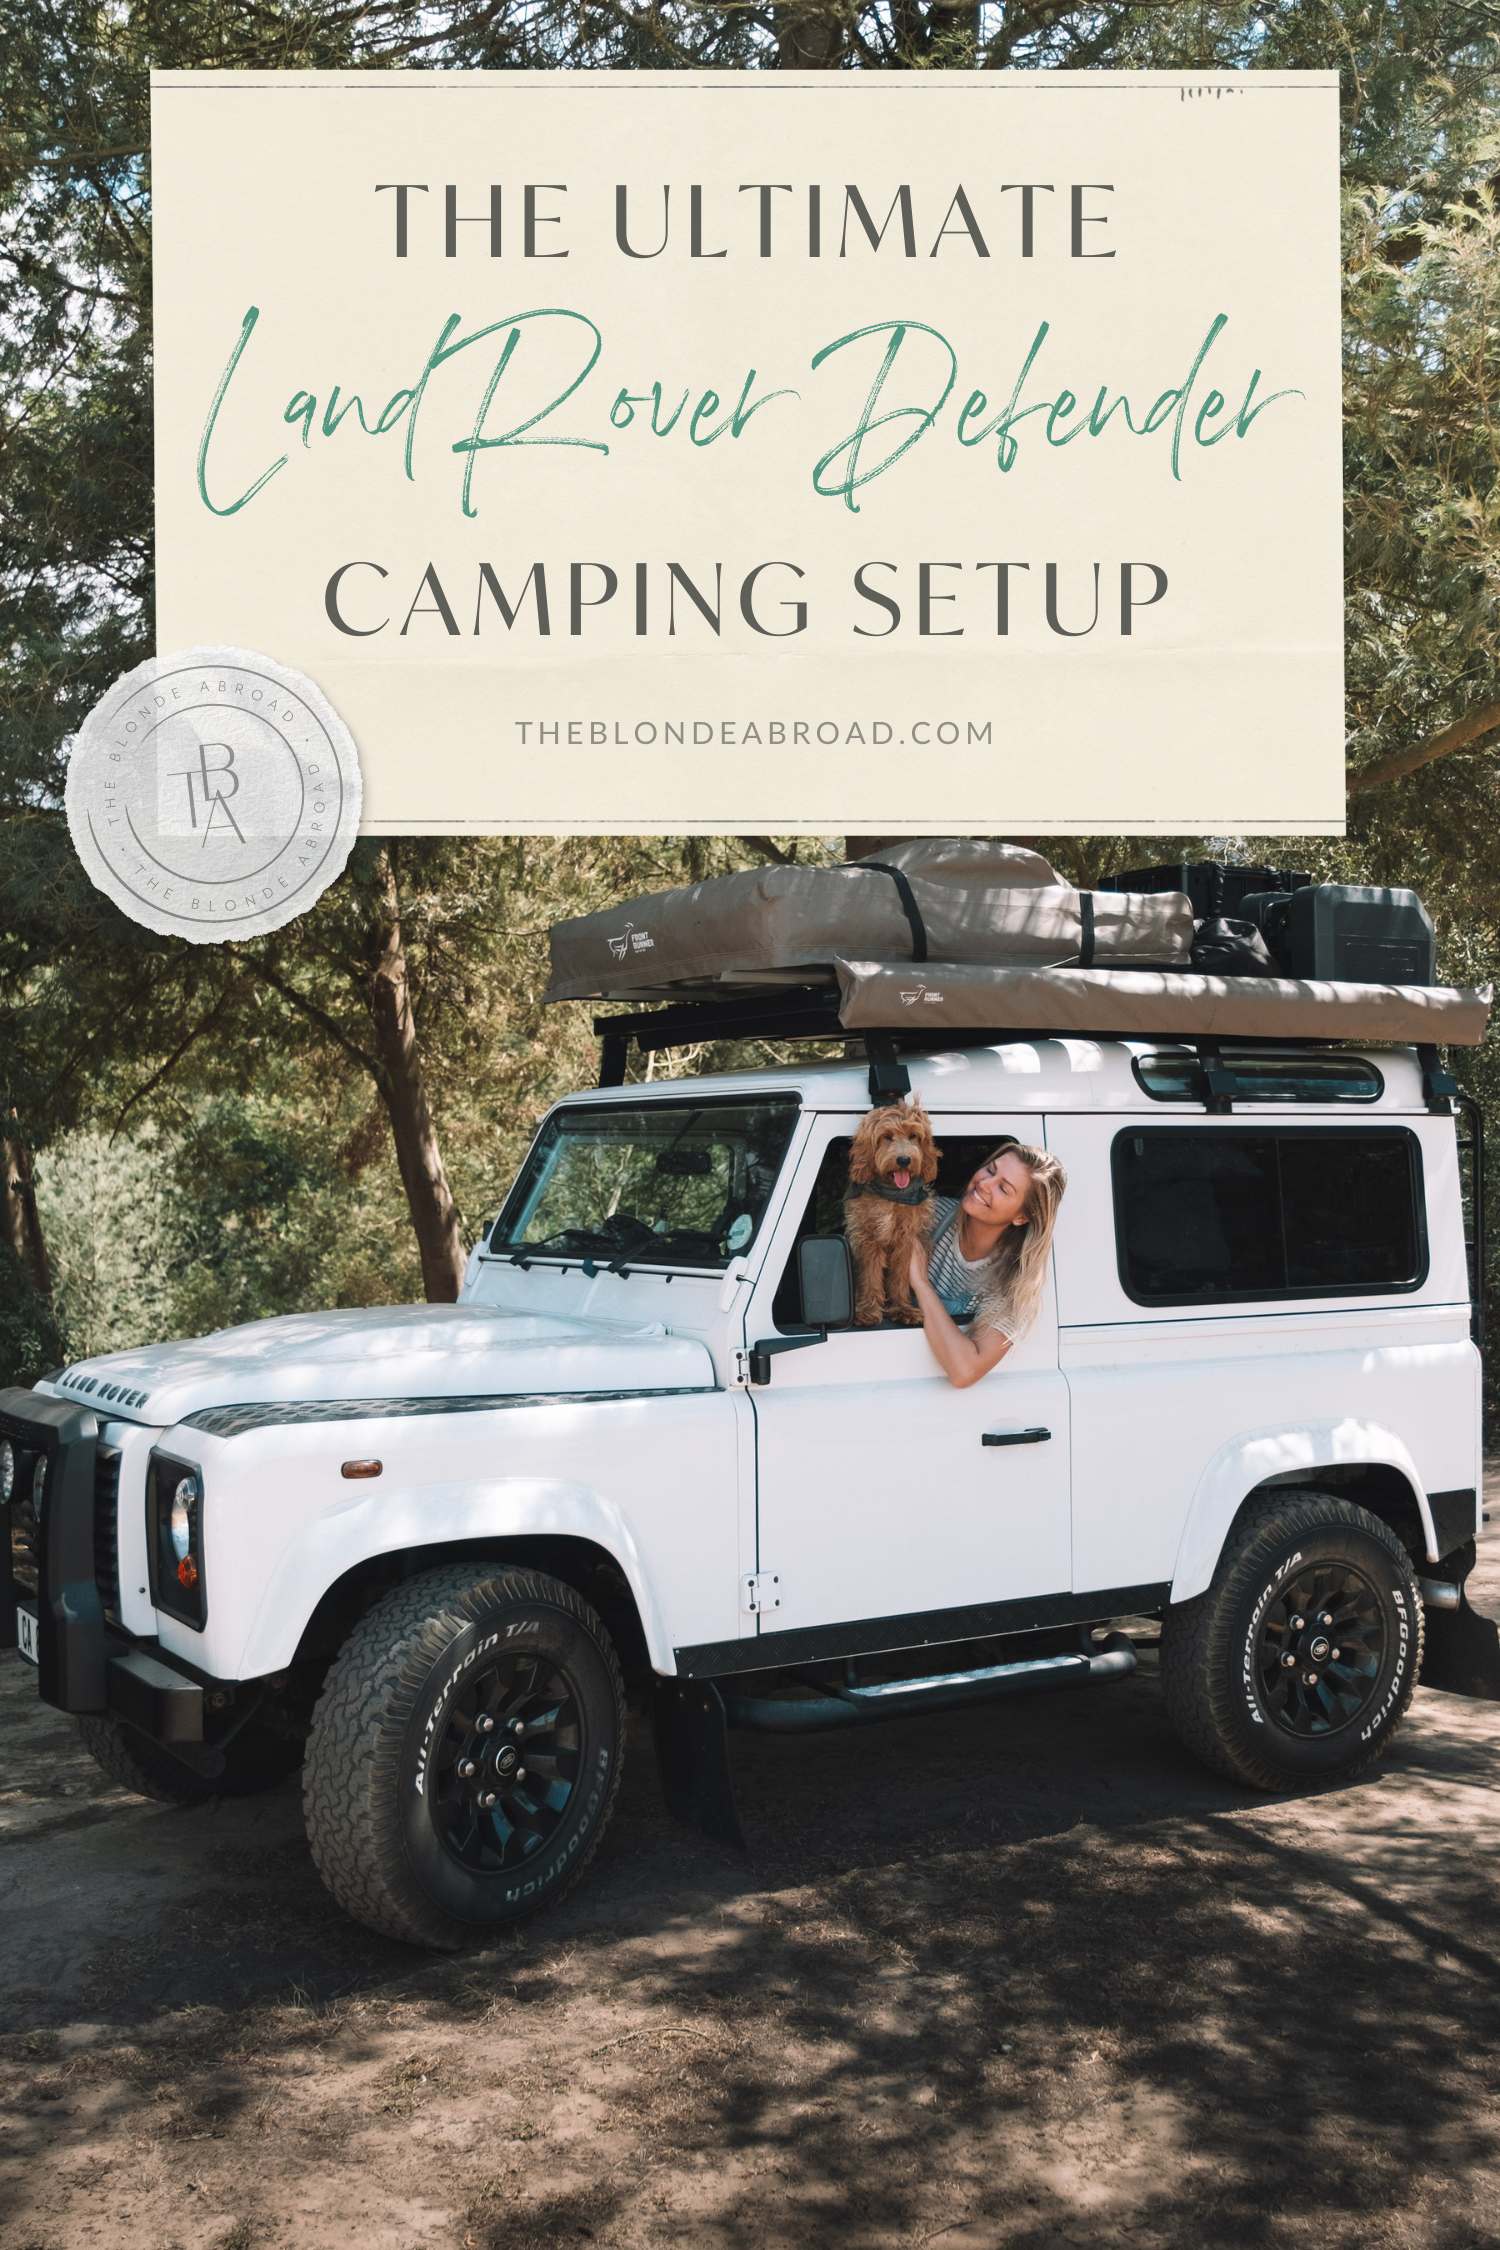 The Ultimate Land Rover Defender Camping Setup